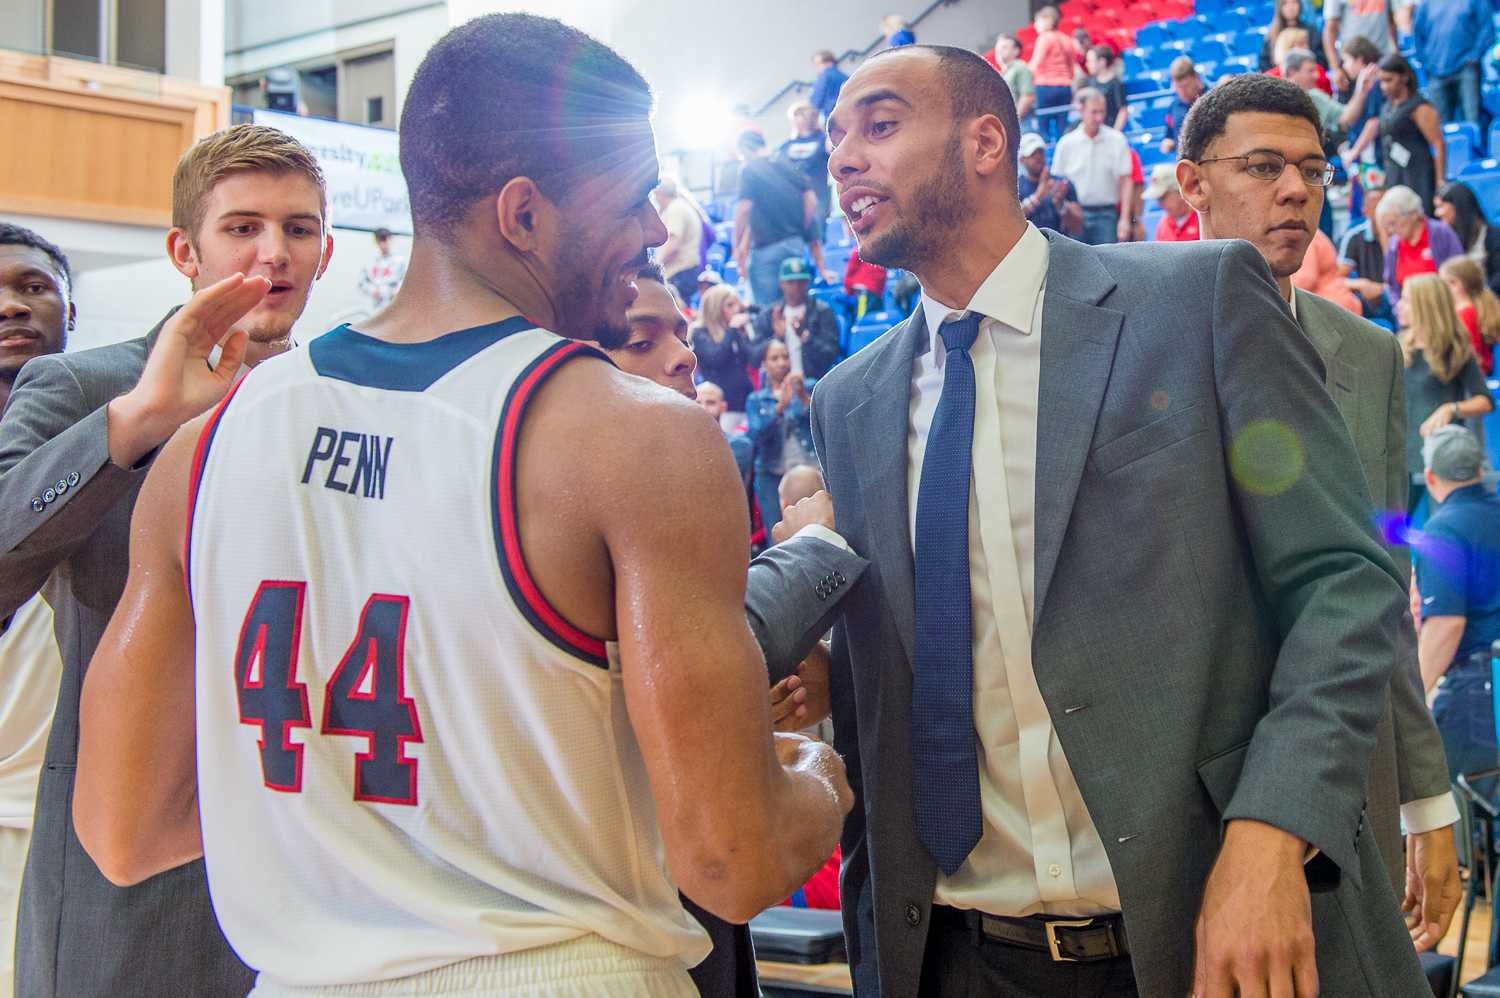 Injured FAU forward Justin Raffington, congratulates Penn (44) after FAU’s 76-62 victory over Marshall. Raffington has missed several games with a stress fracture in his foot.